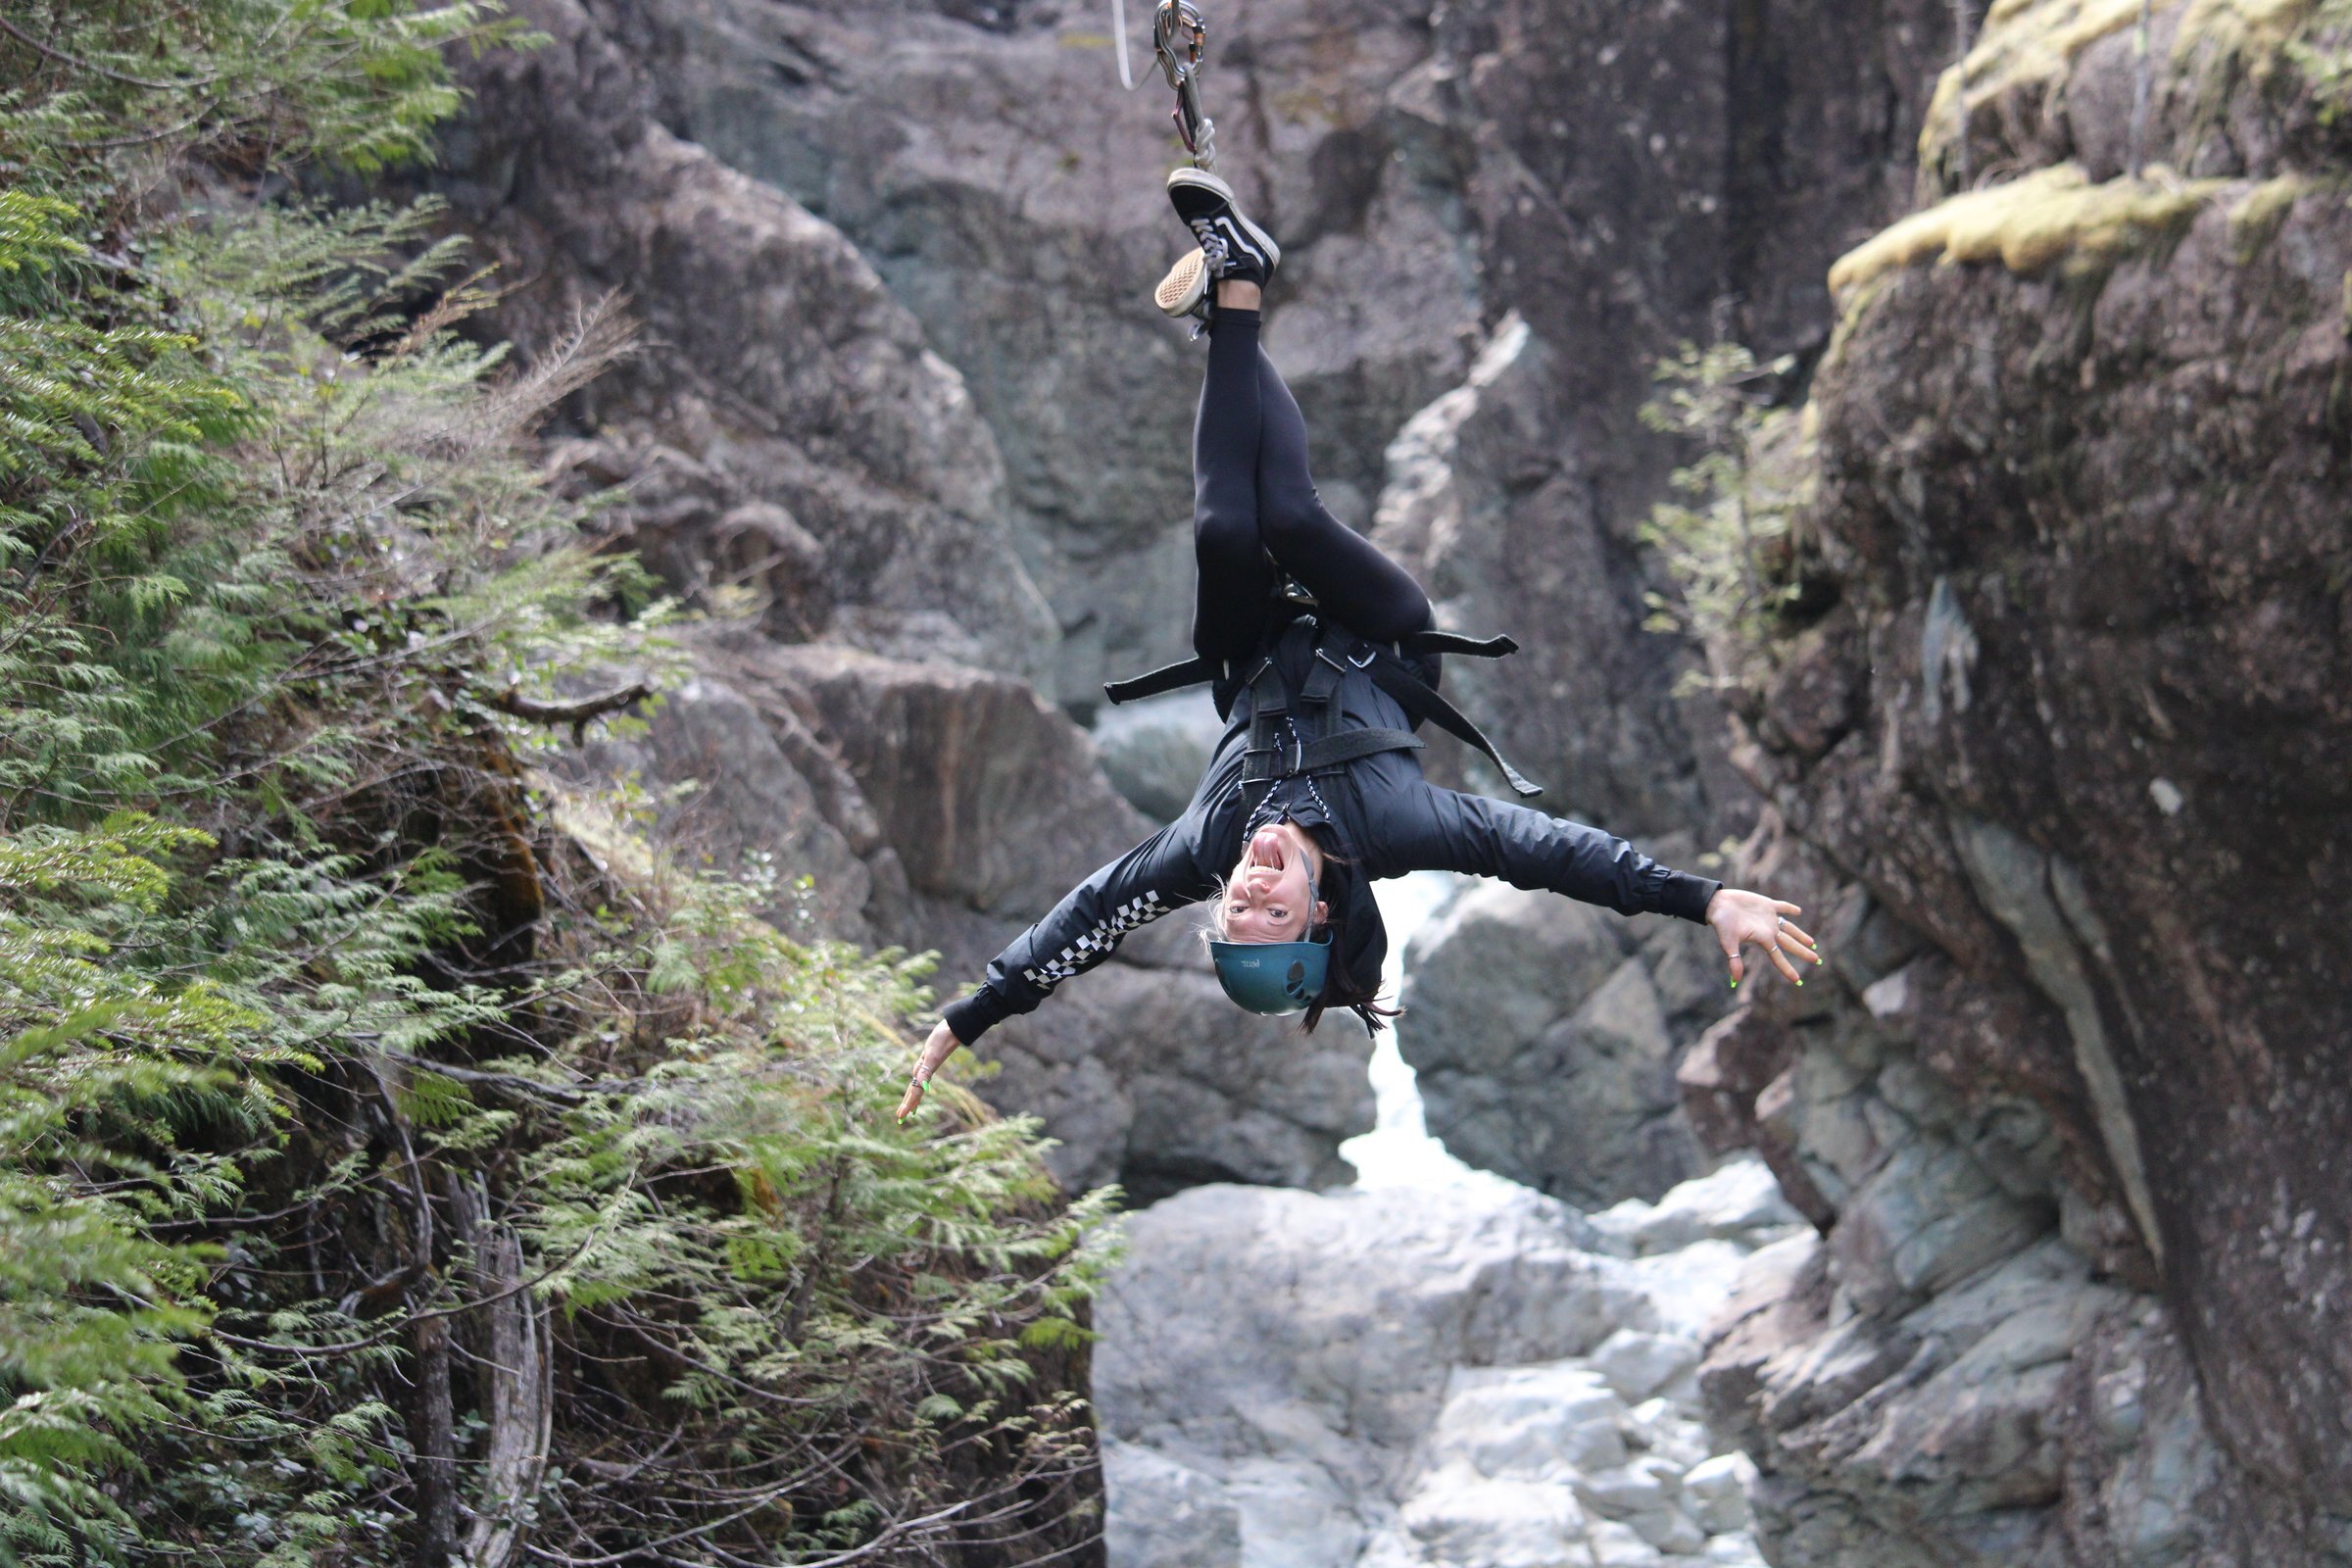 Ecstatic zipliner upside down in the canyon at West Coast Wild.